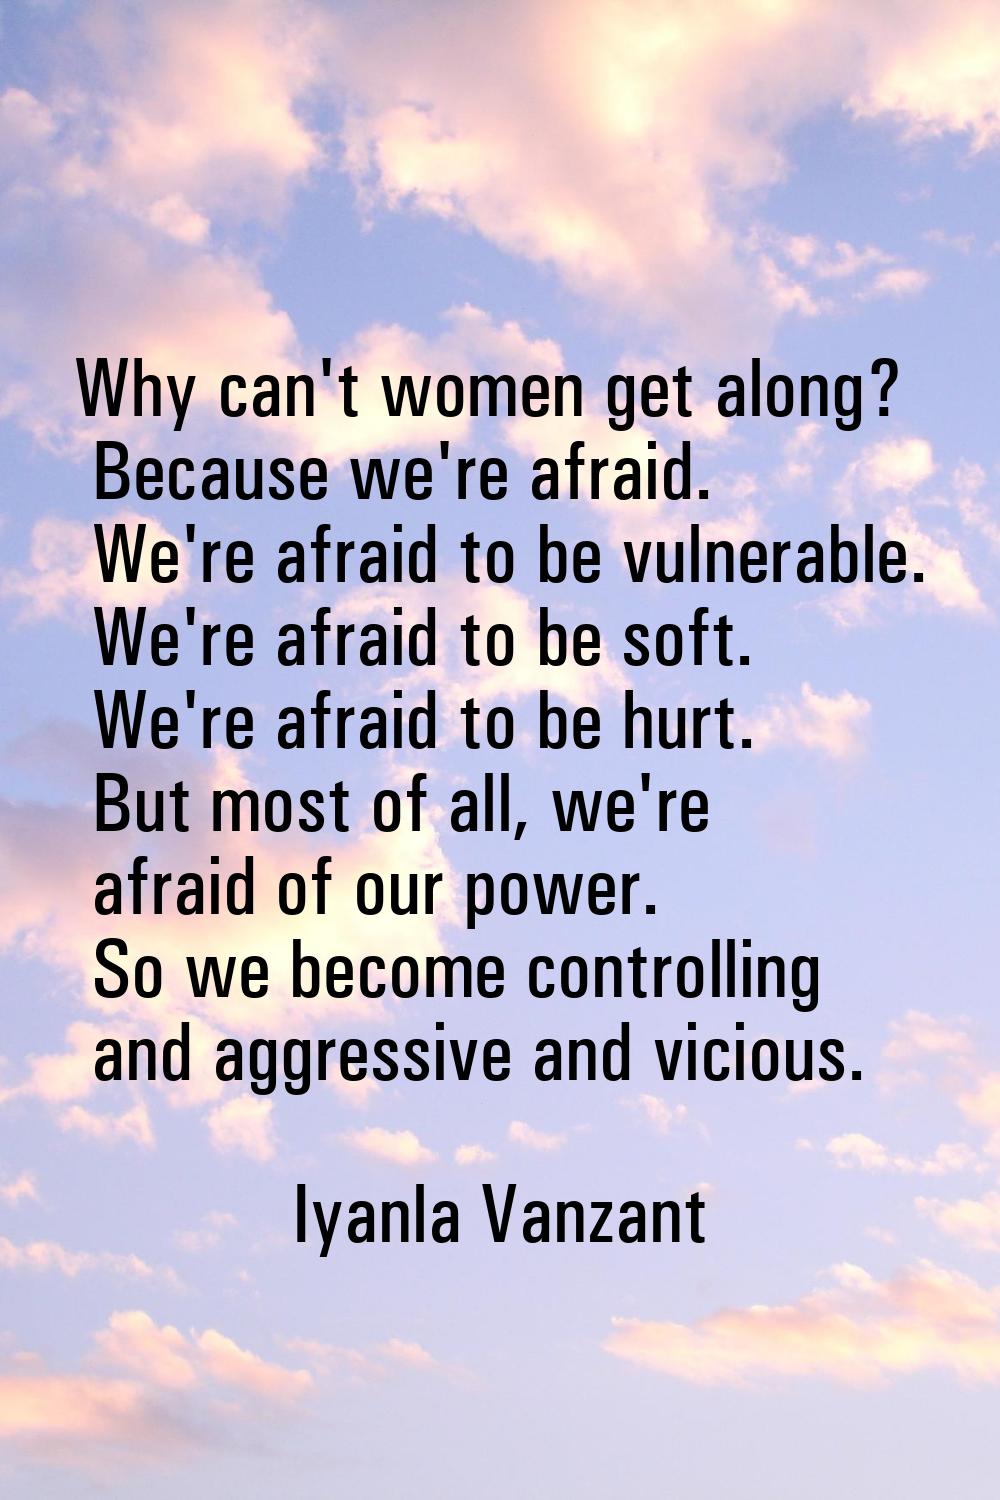 Why can't women get along? Because we're afraid. We're afraid to be vulnerable. We're afraid to be 